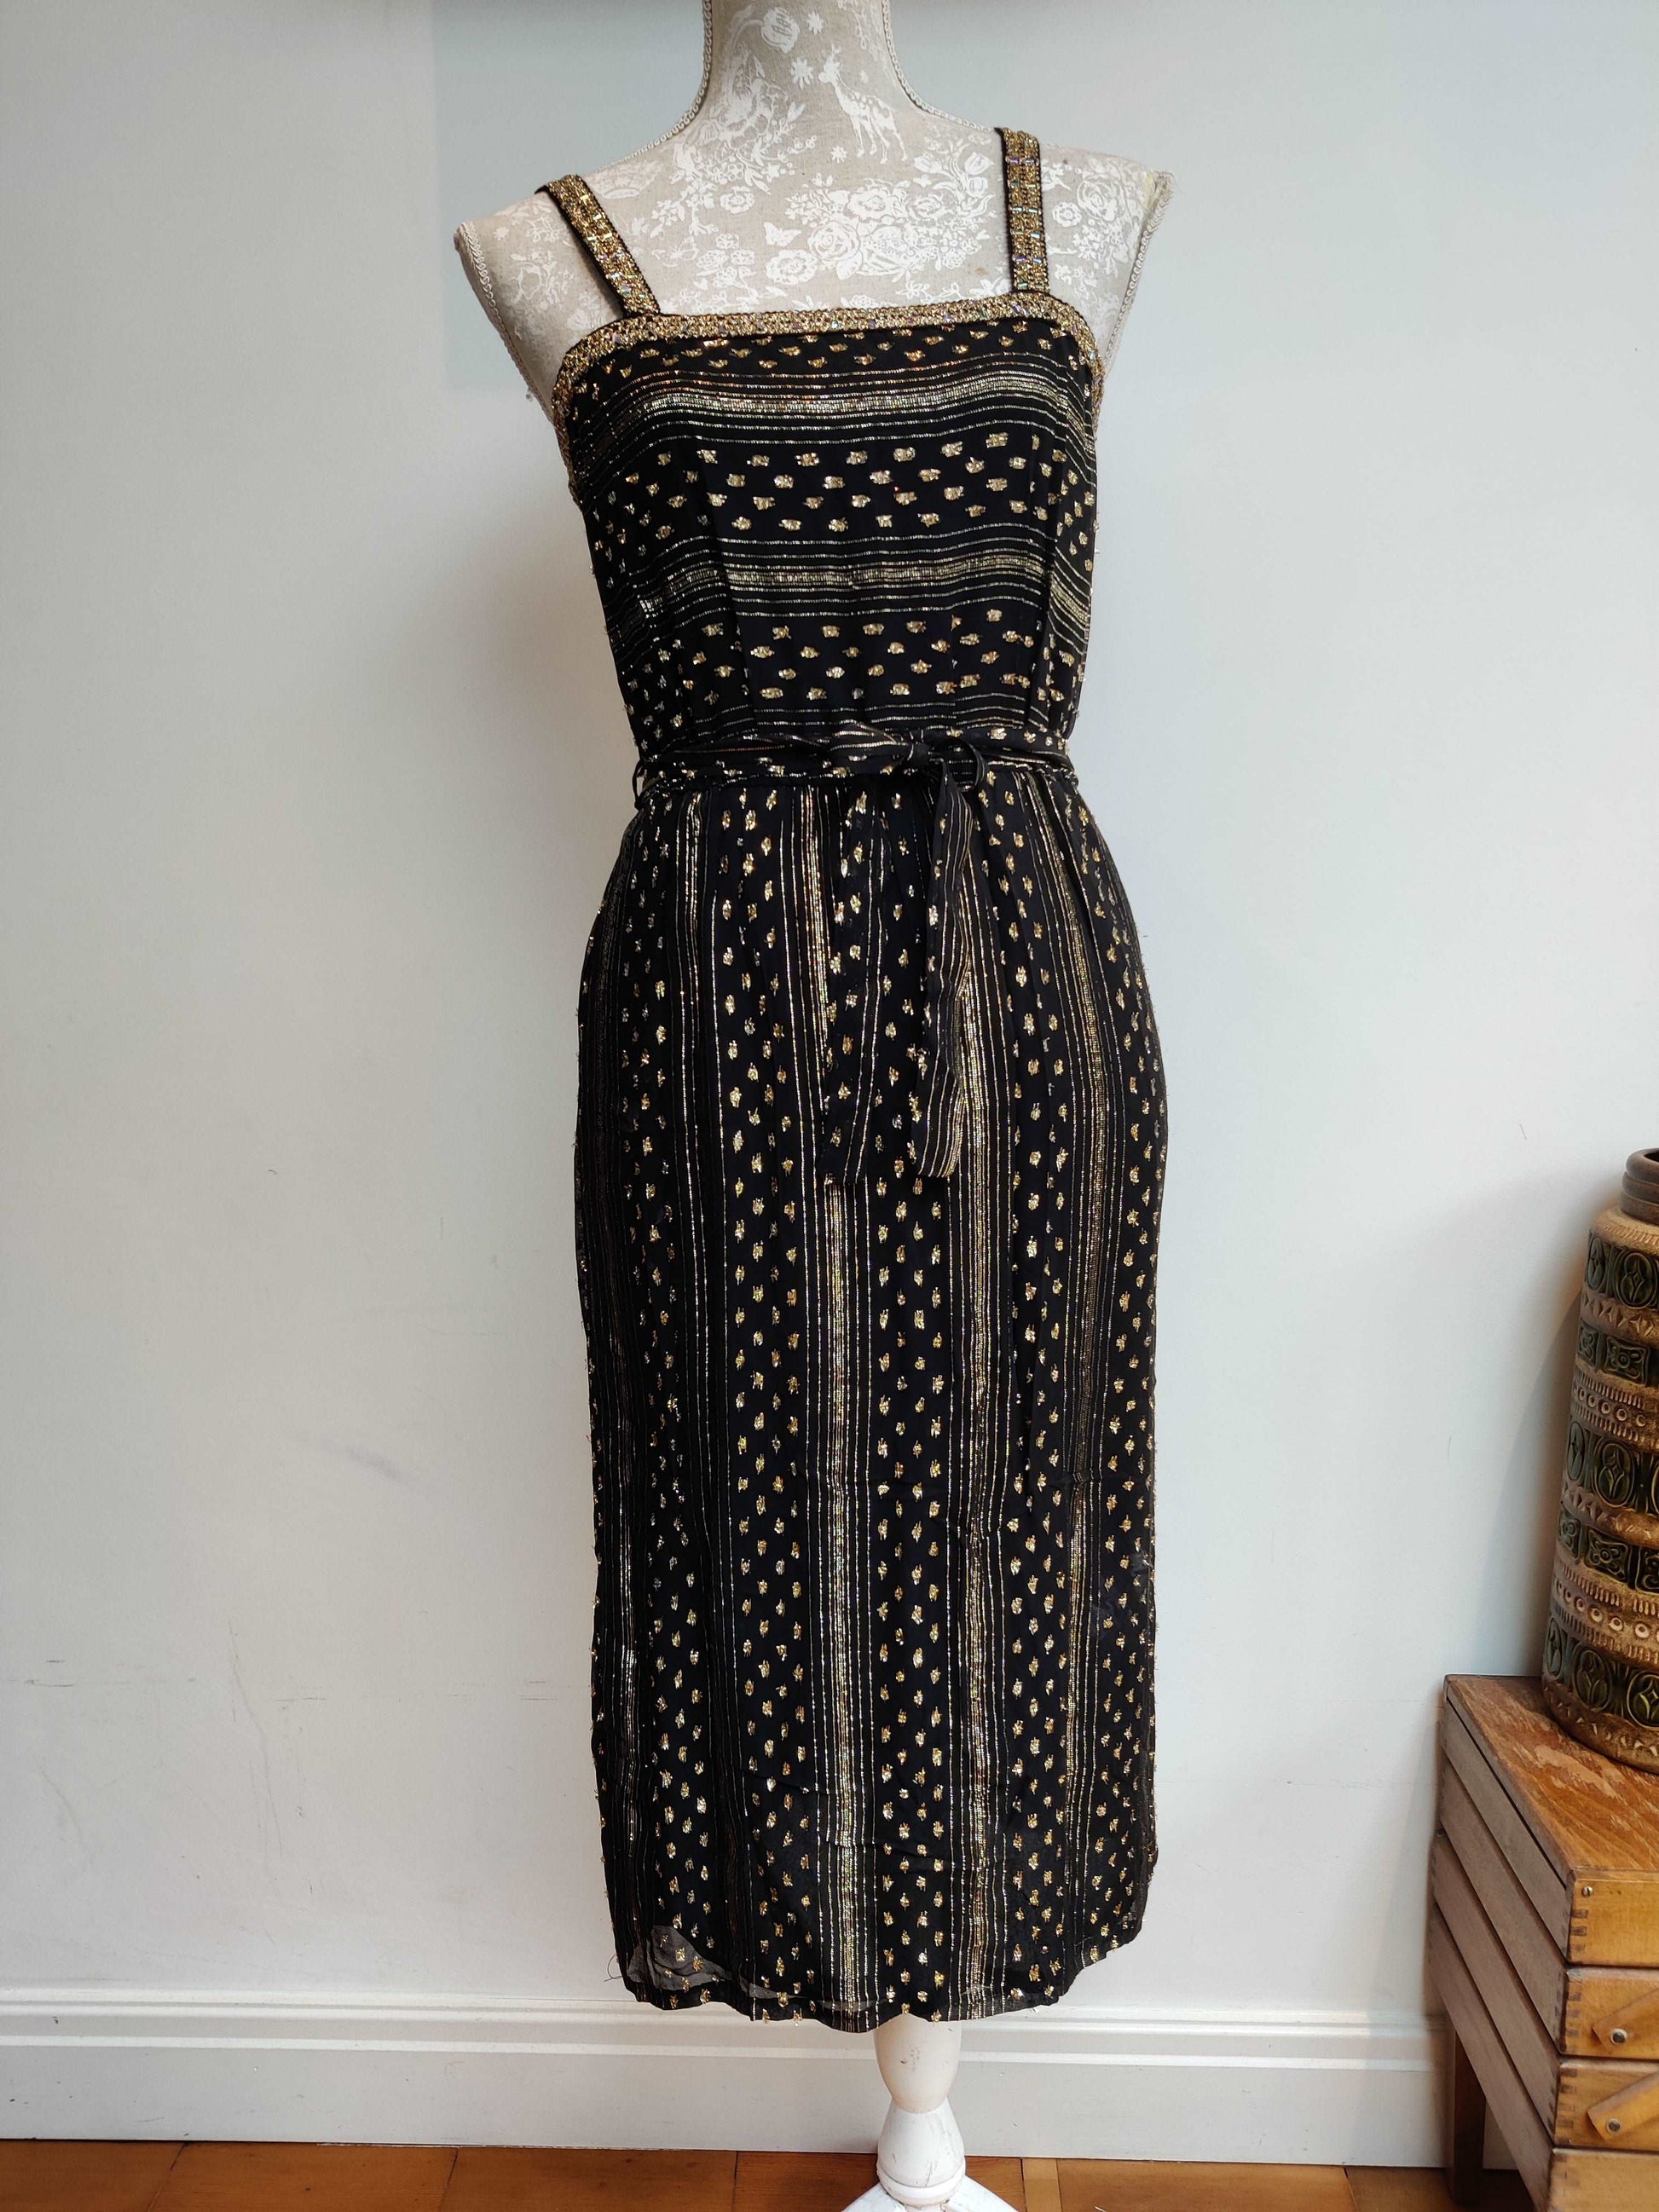 Black and gold vintage dress with sparkle